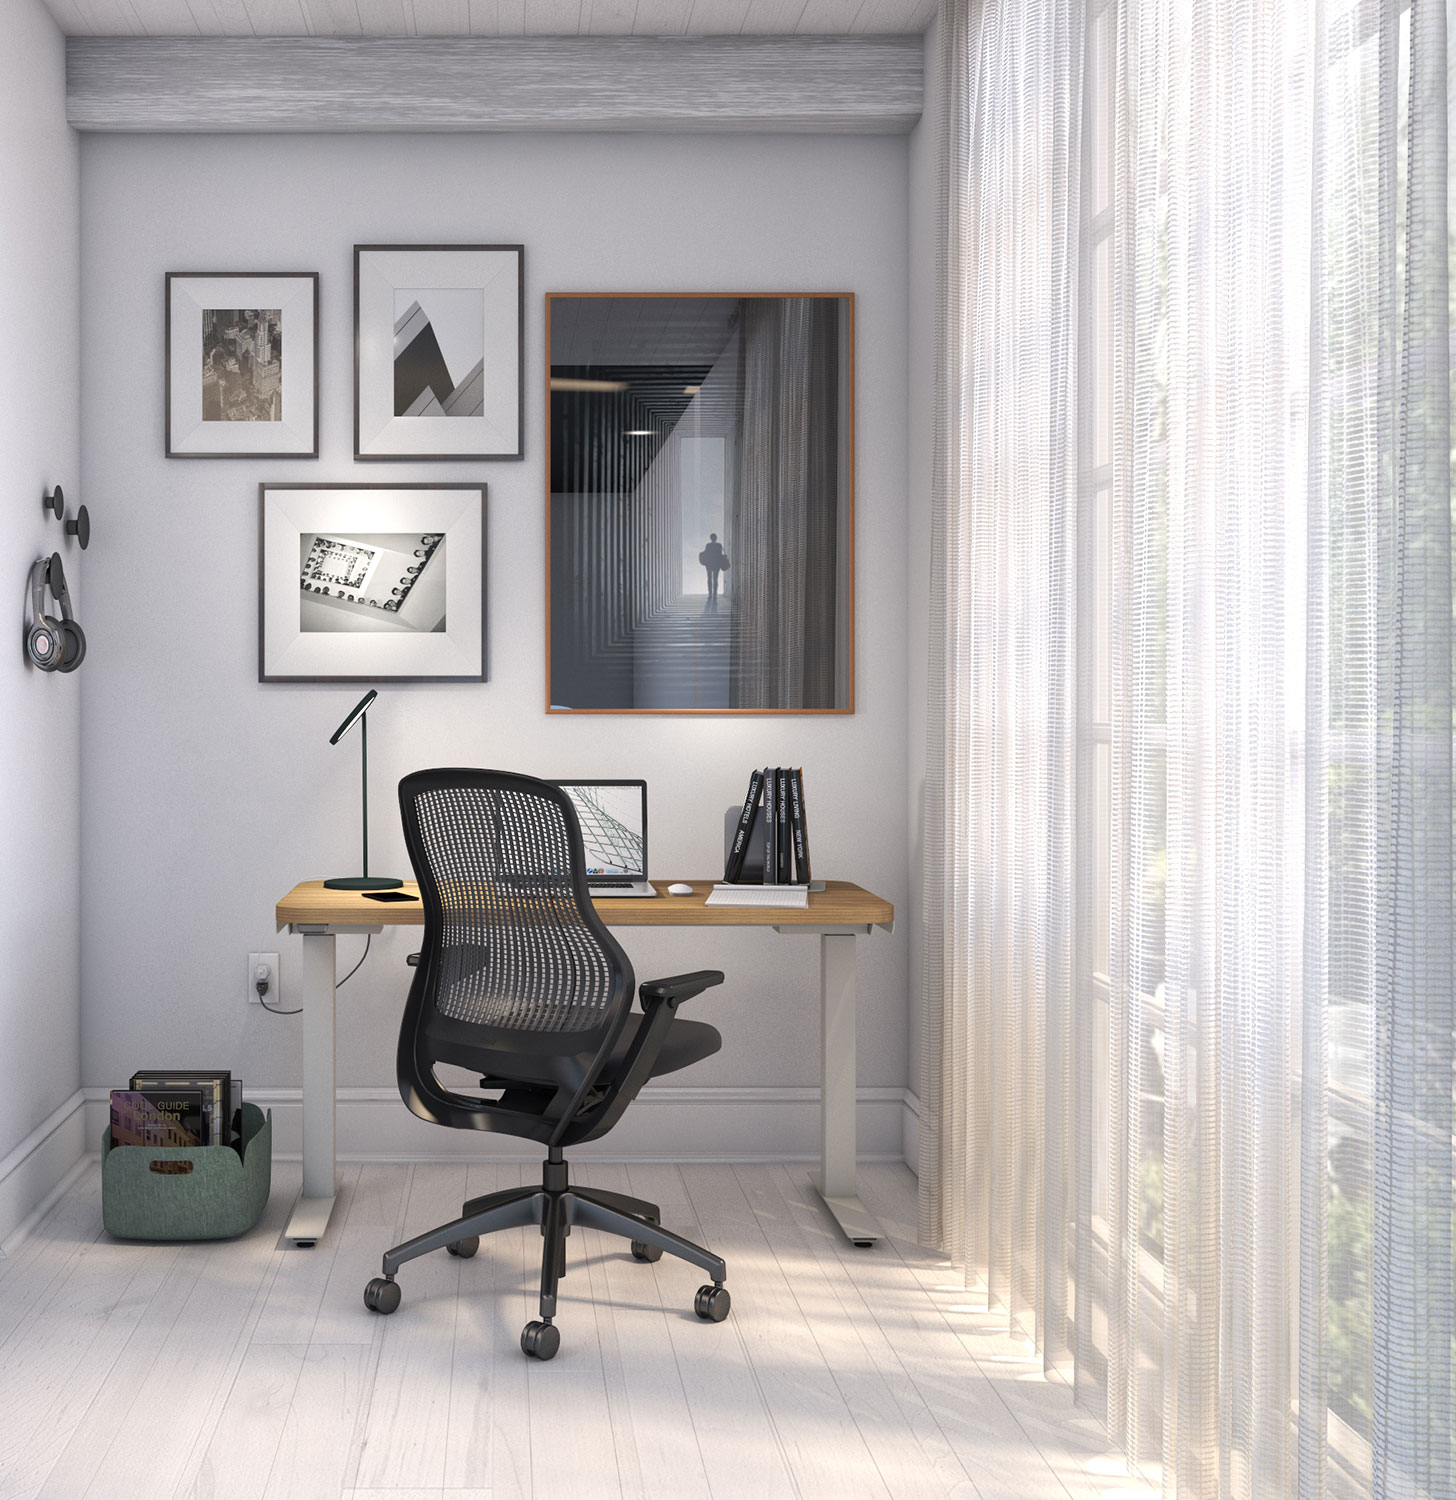 Hipso Height-Adjustable Desk with ReGeneration by Knoll Task Chair and Muuto accessories Work from Home Inspiration from Knoll and Muuto